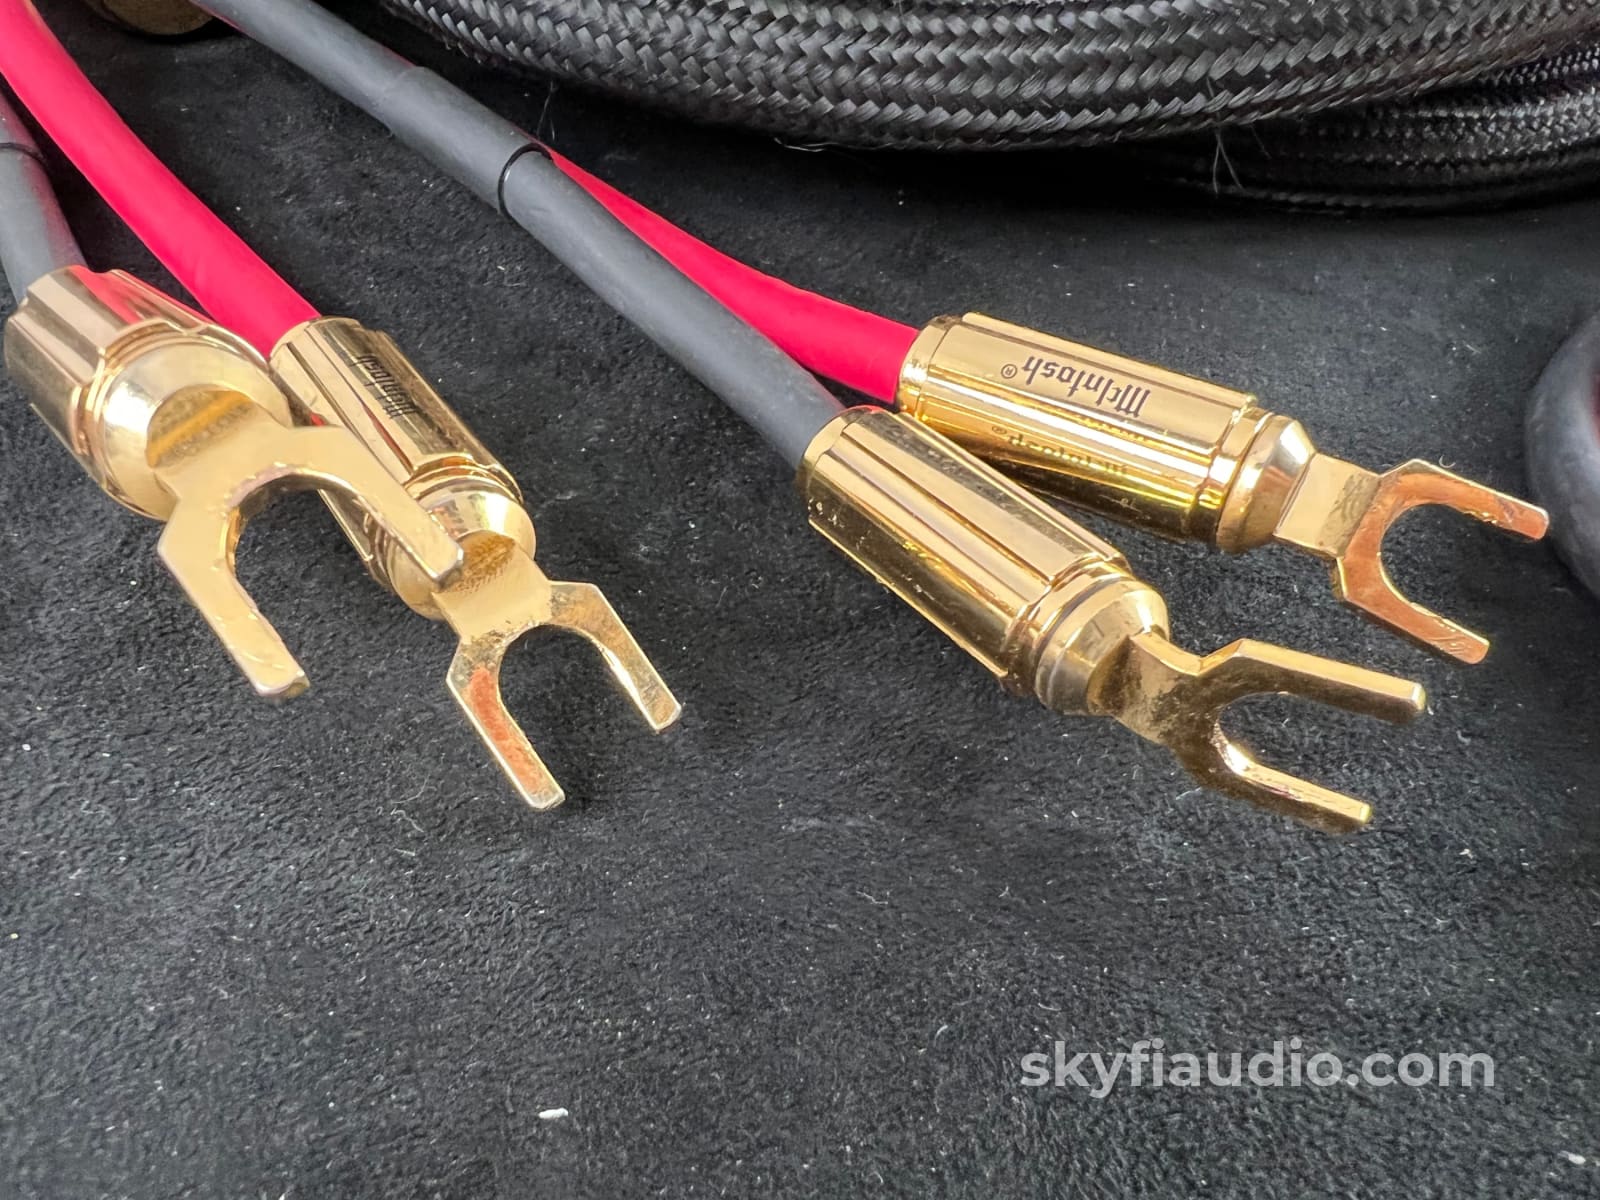 Mcintosh Custom Length Speaker Cables (Pair) - 6M In Store Only